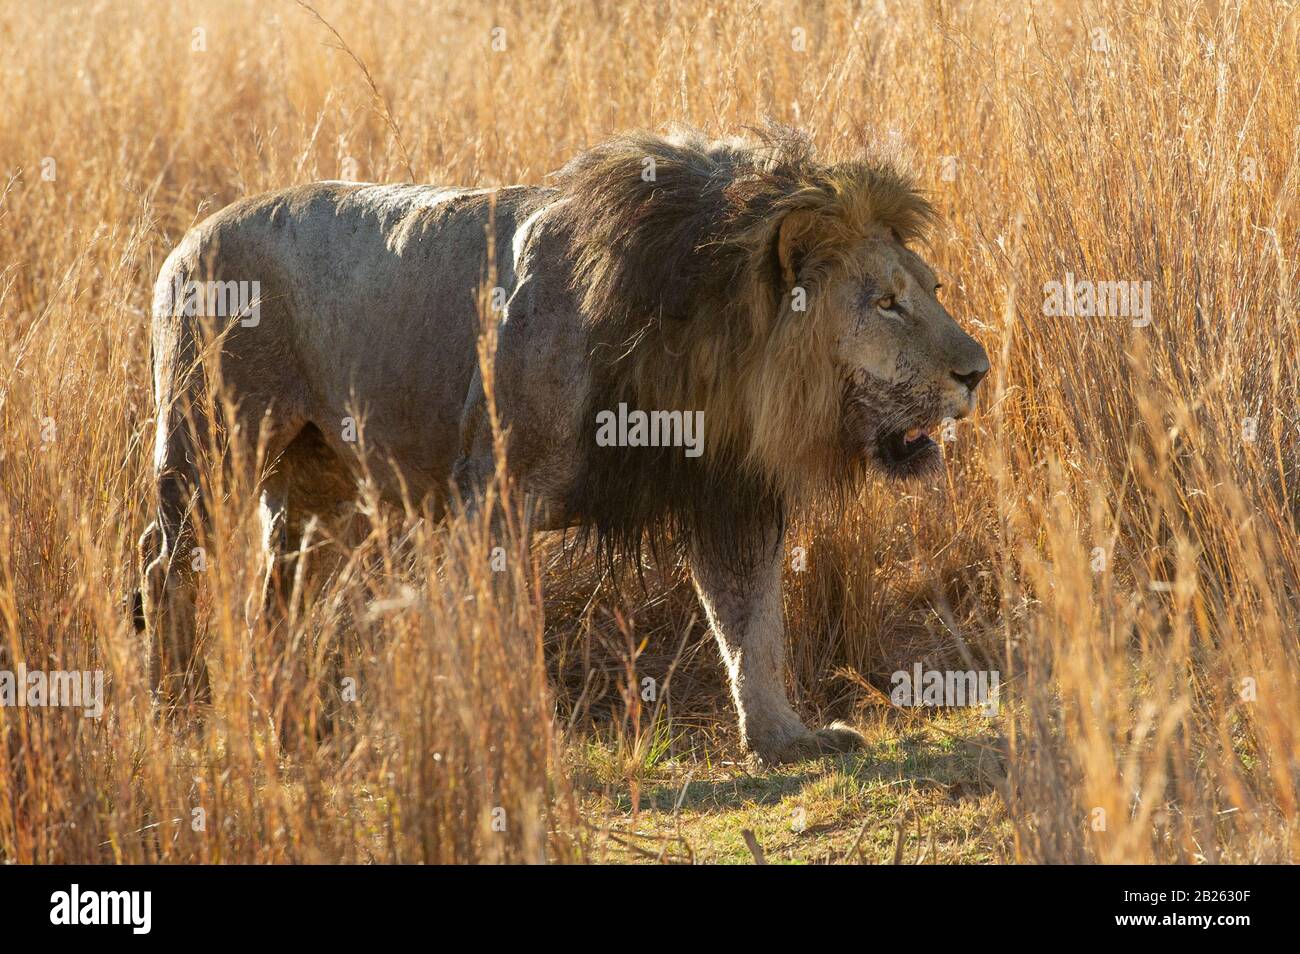 Lion, Panthero leo, Welgevonden Game Reserve, South Africa Stock Photo